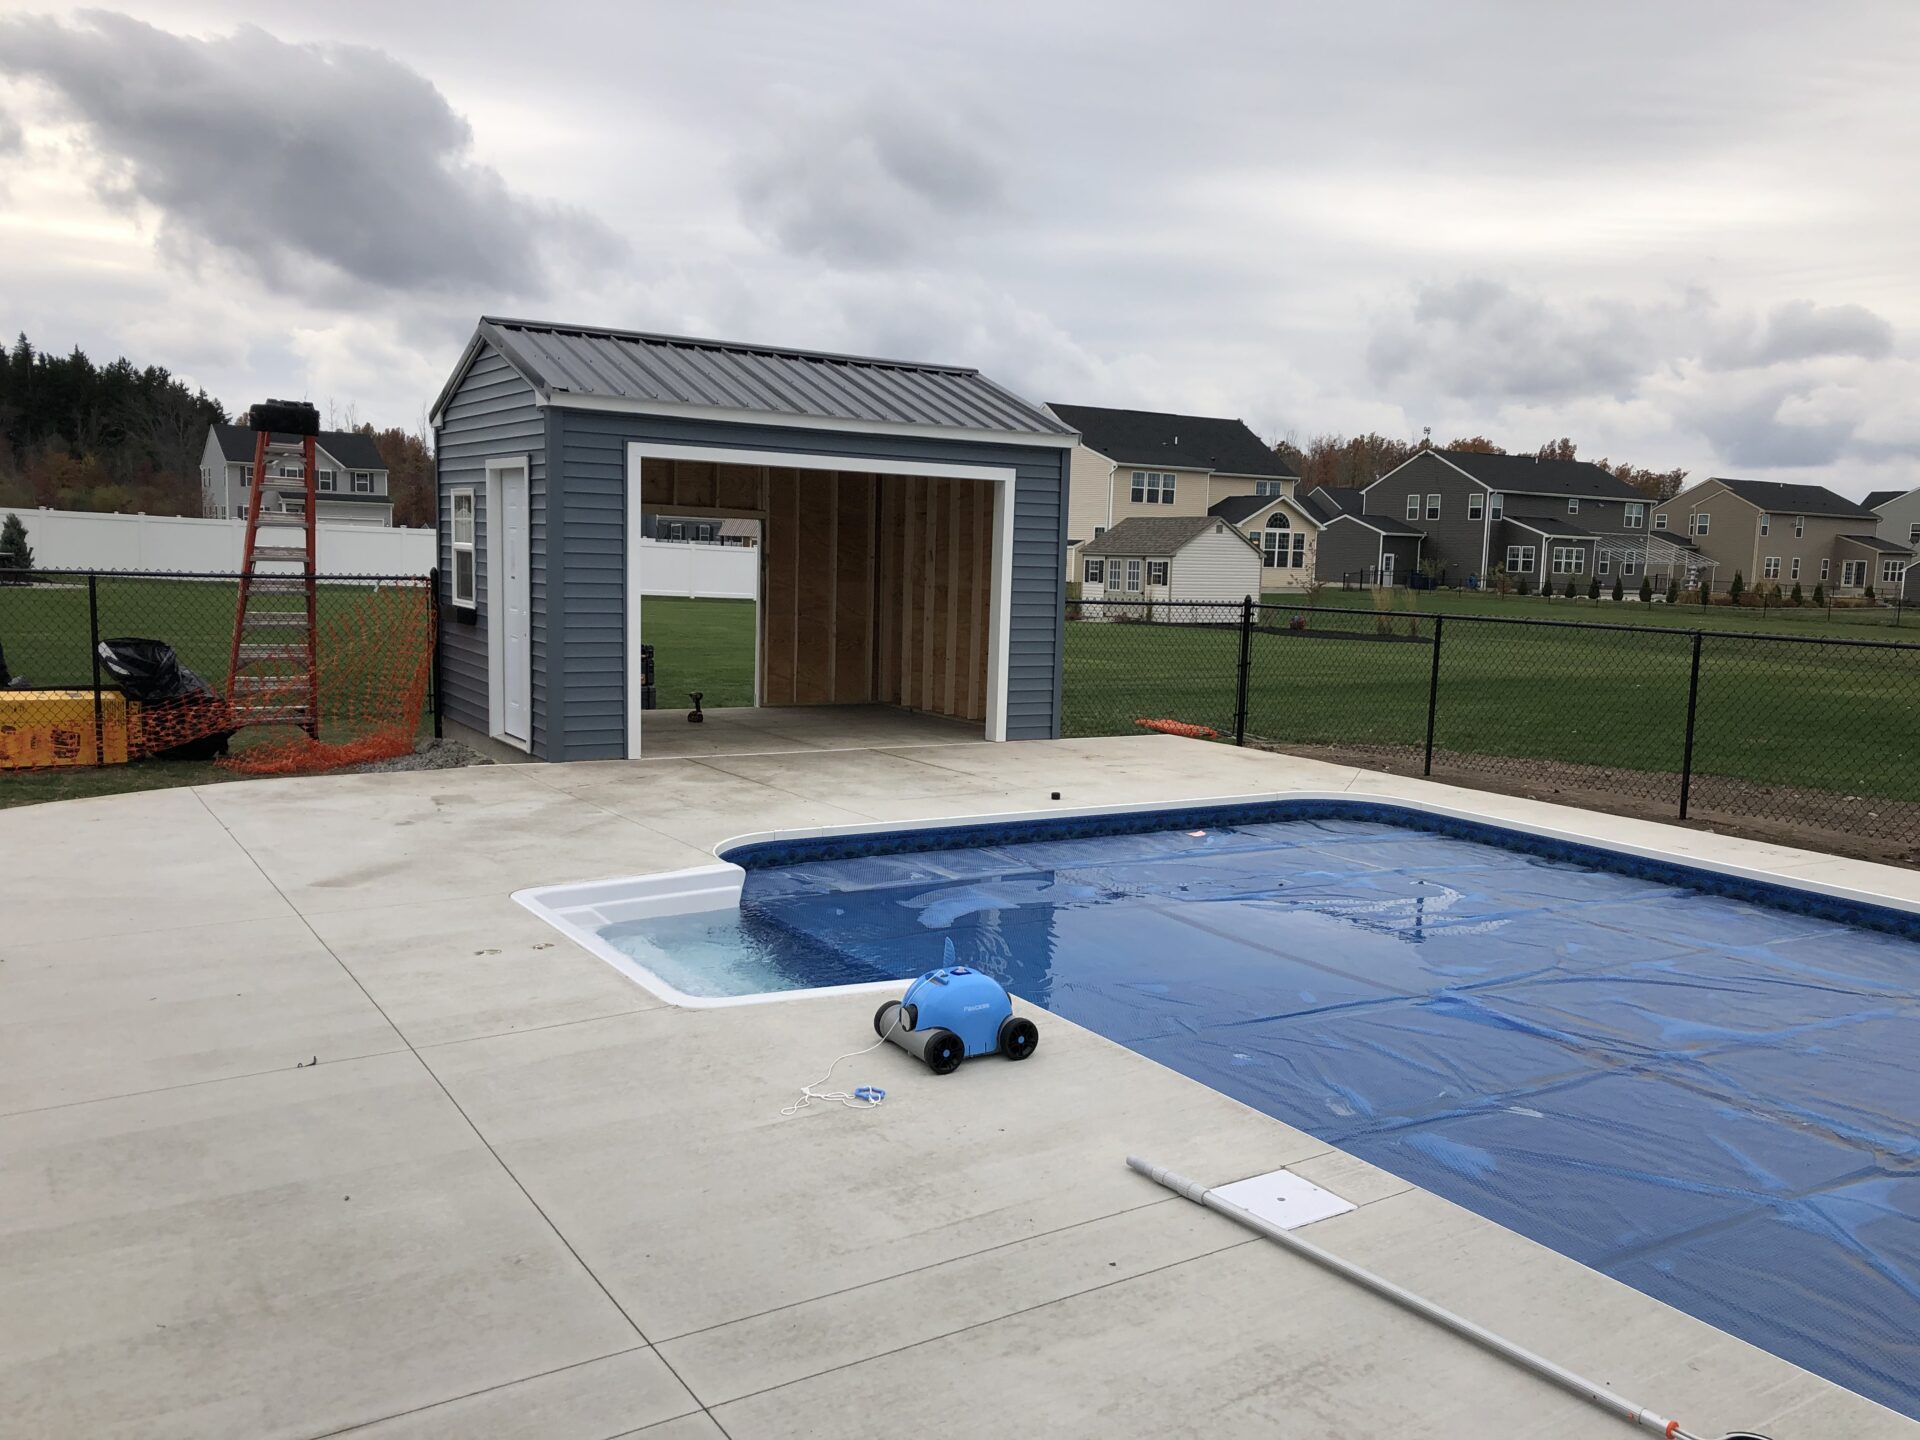 A pool with a shed and a ladder in the background.